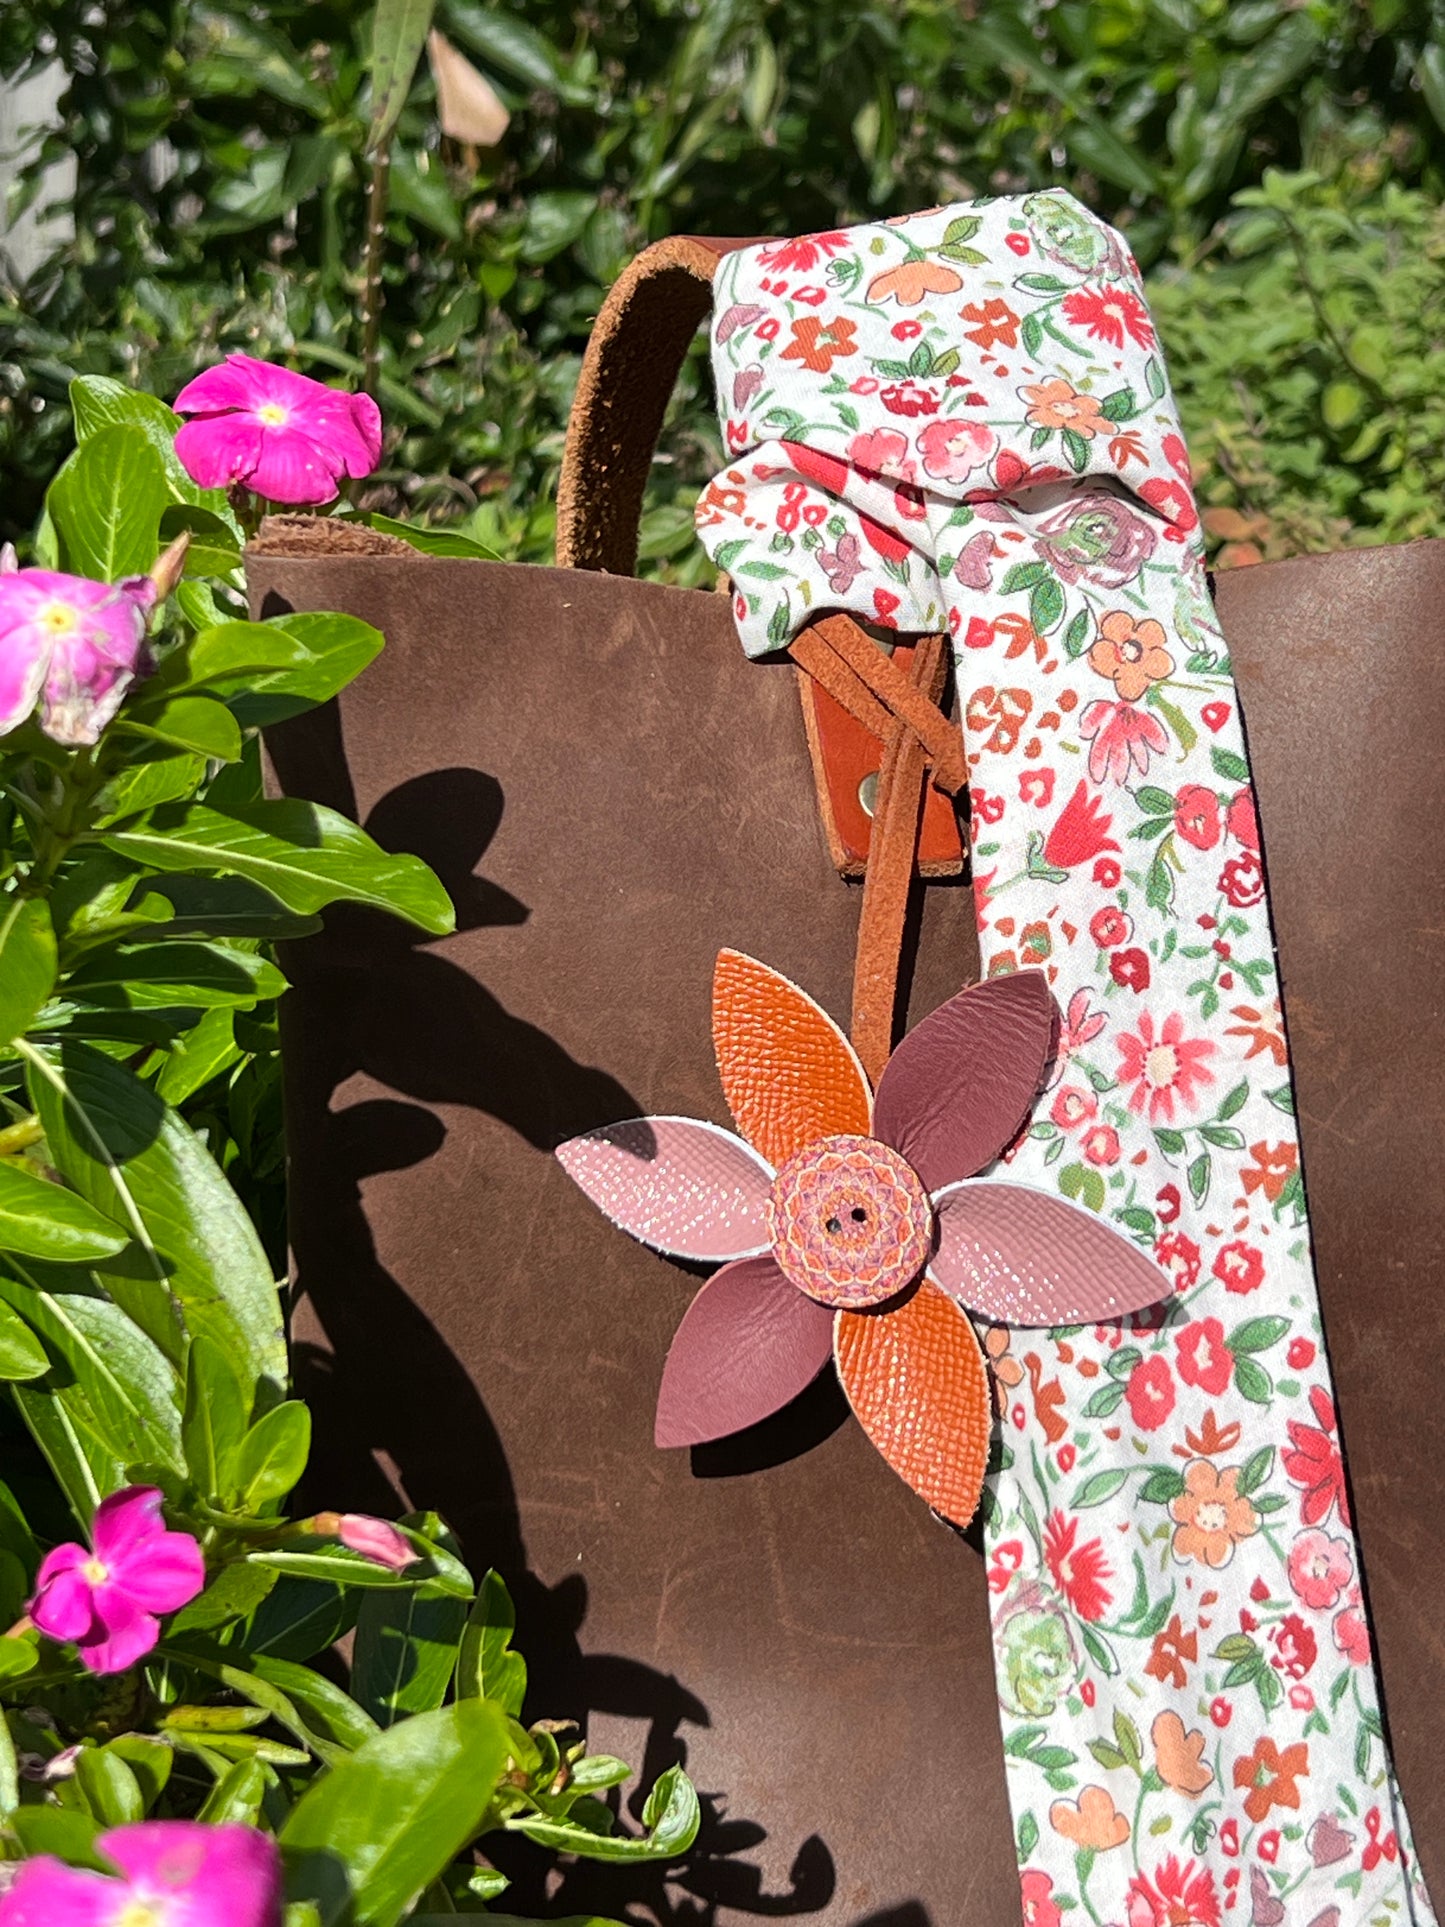 Leather Flower Bag Charm with Tote Loop in Spring Brights